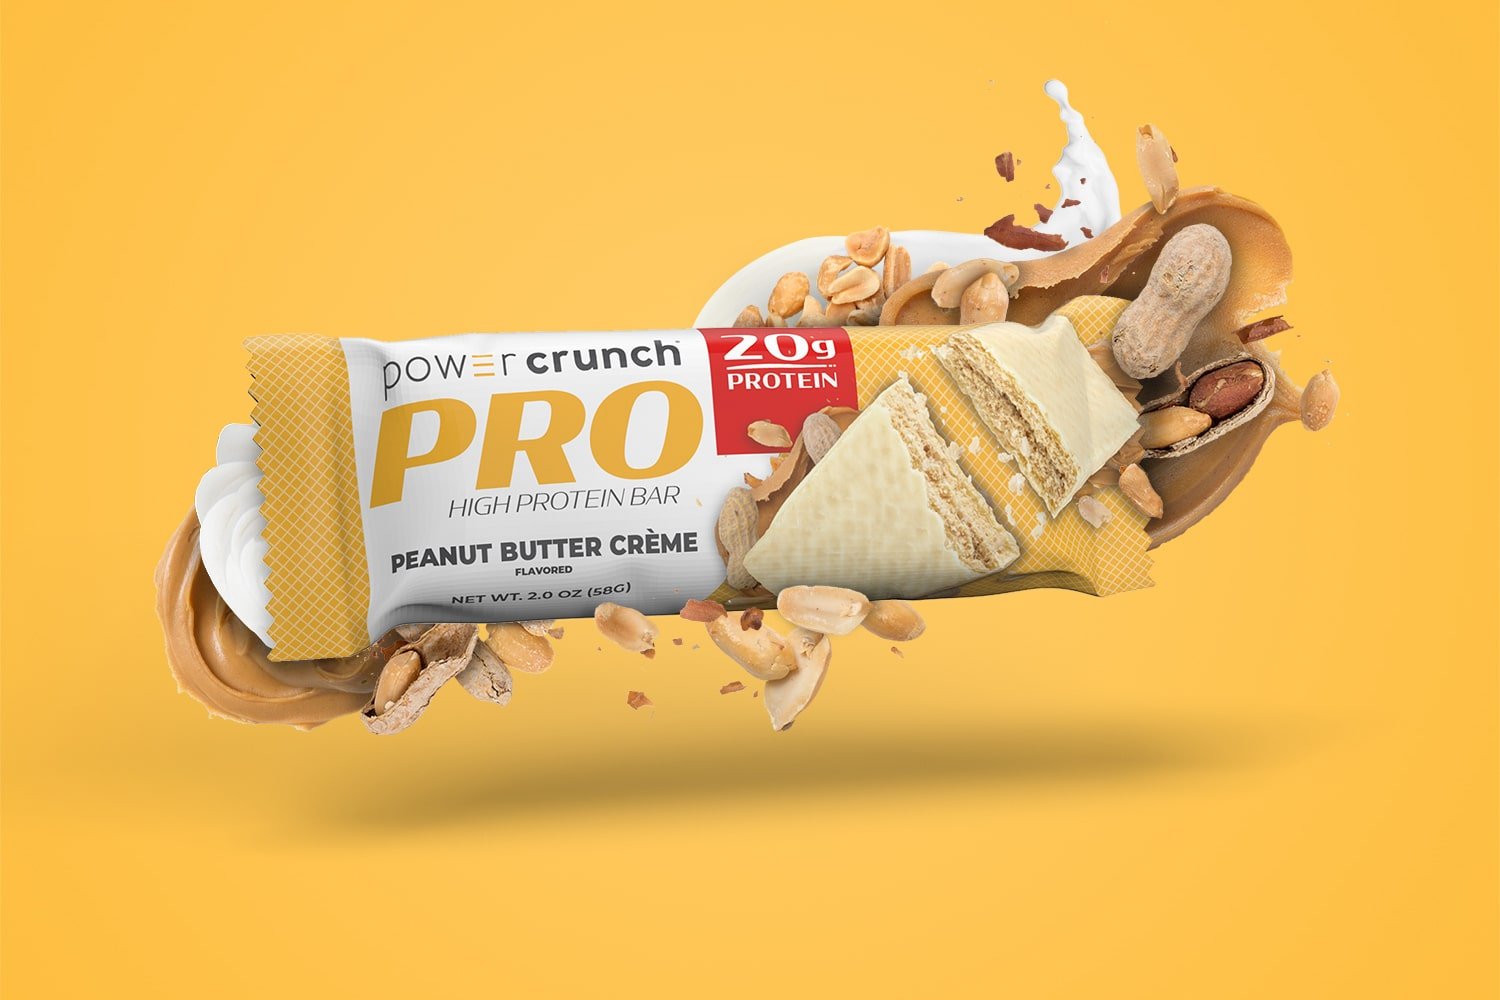 PRO Peanut Butter 20g protein bars pictured with Peanut Butter flavor explosion